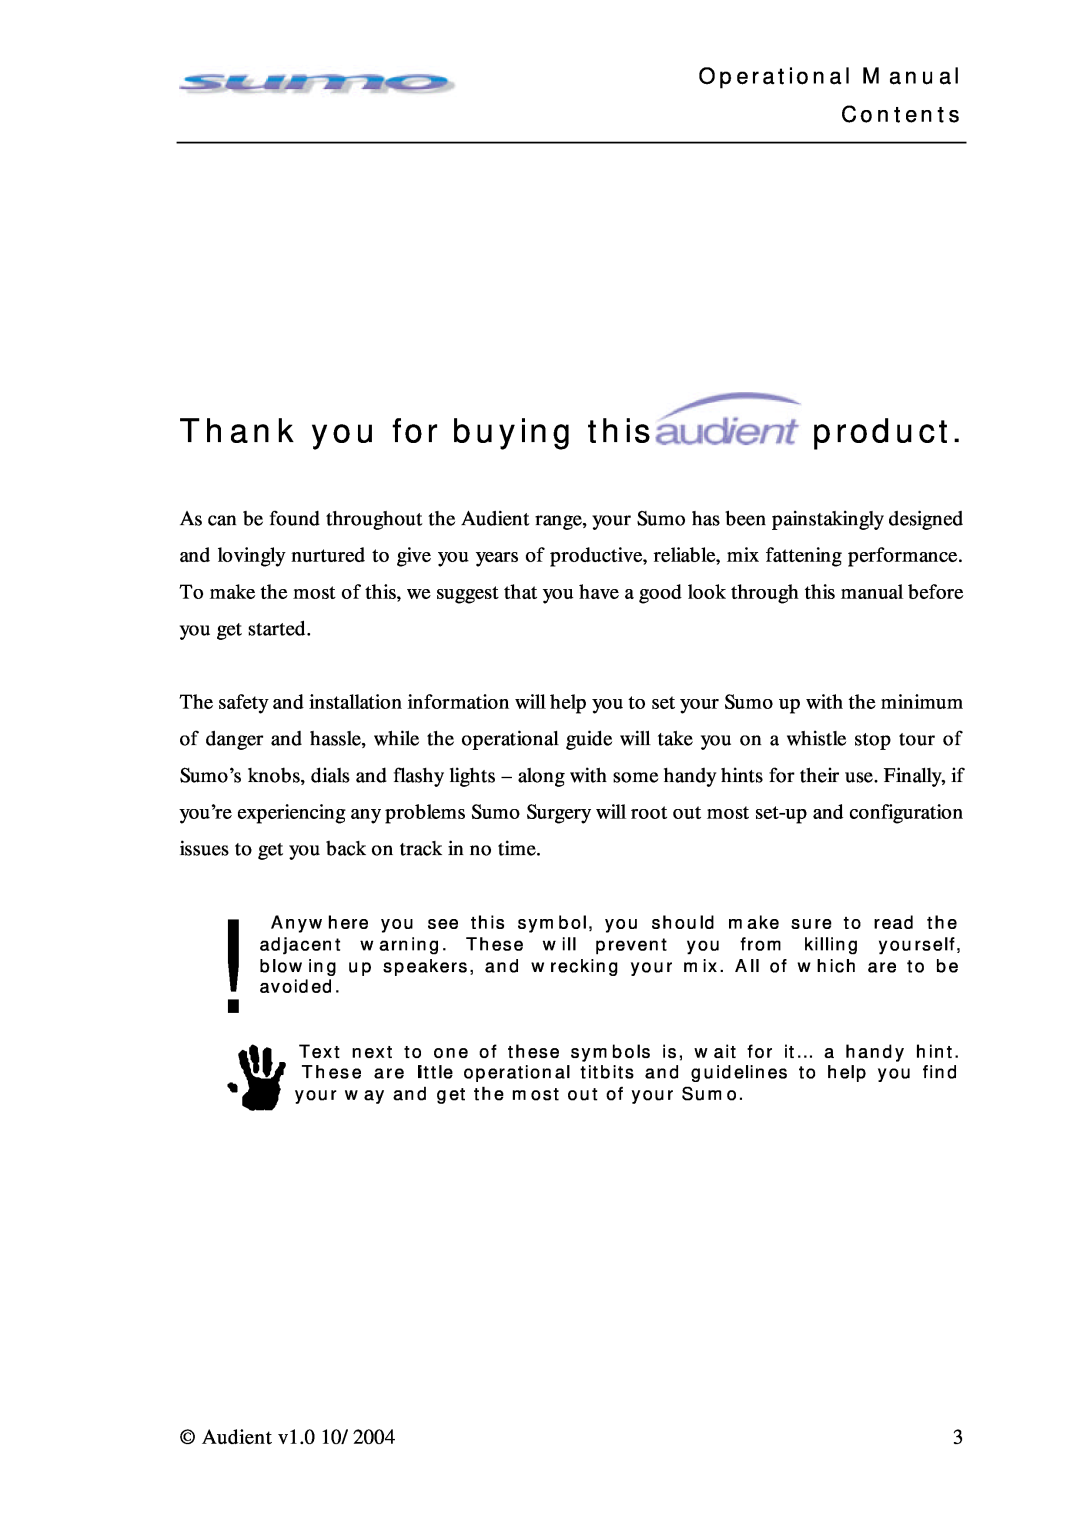 Sumo Summing Amplifier manual Thank you for buying this audient product, Operational Manual Contents 